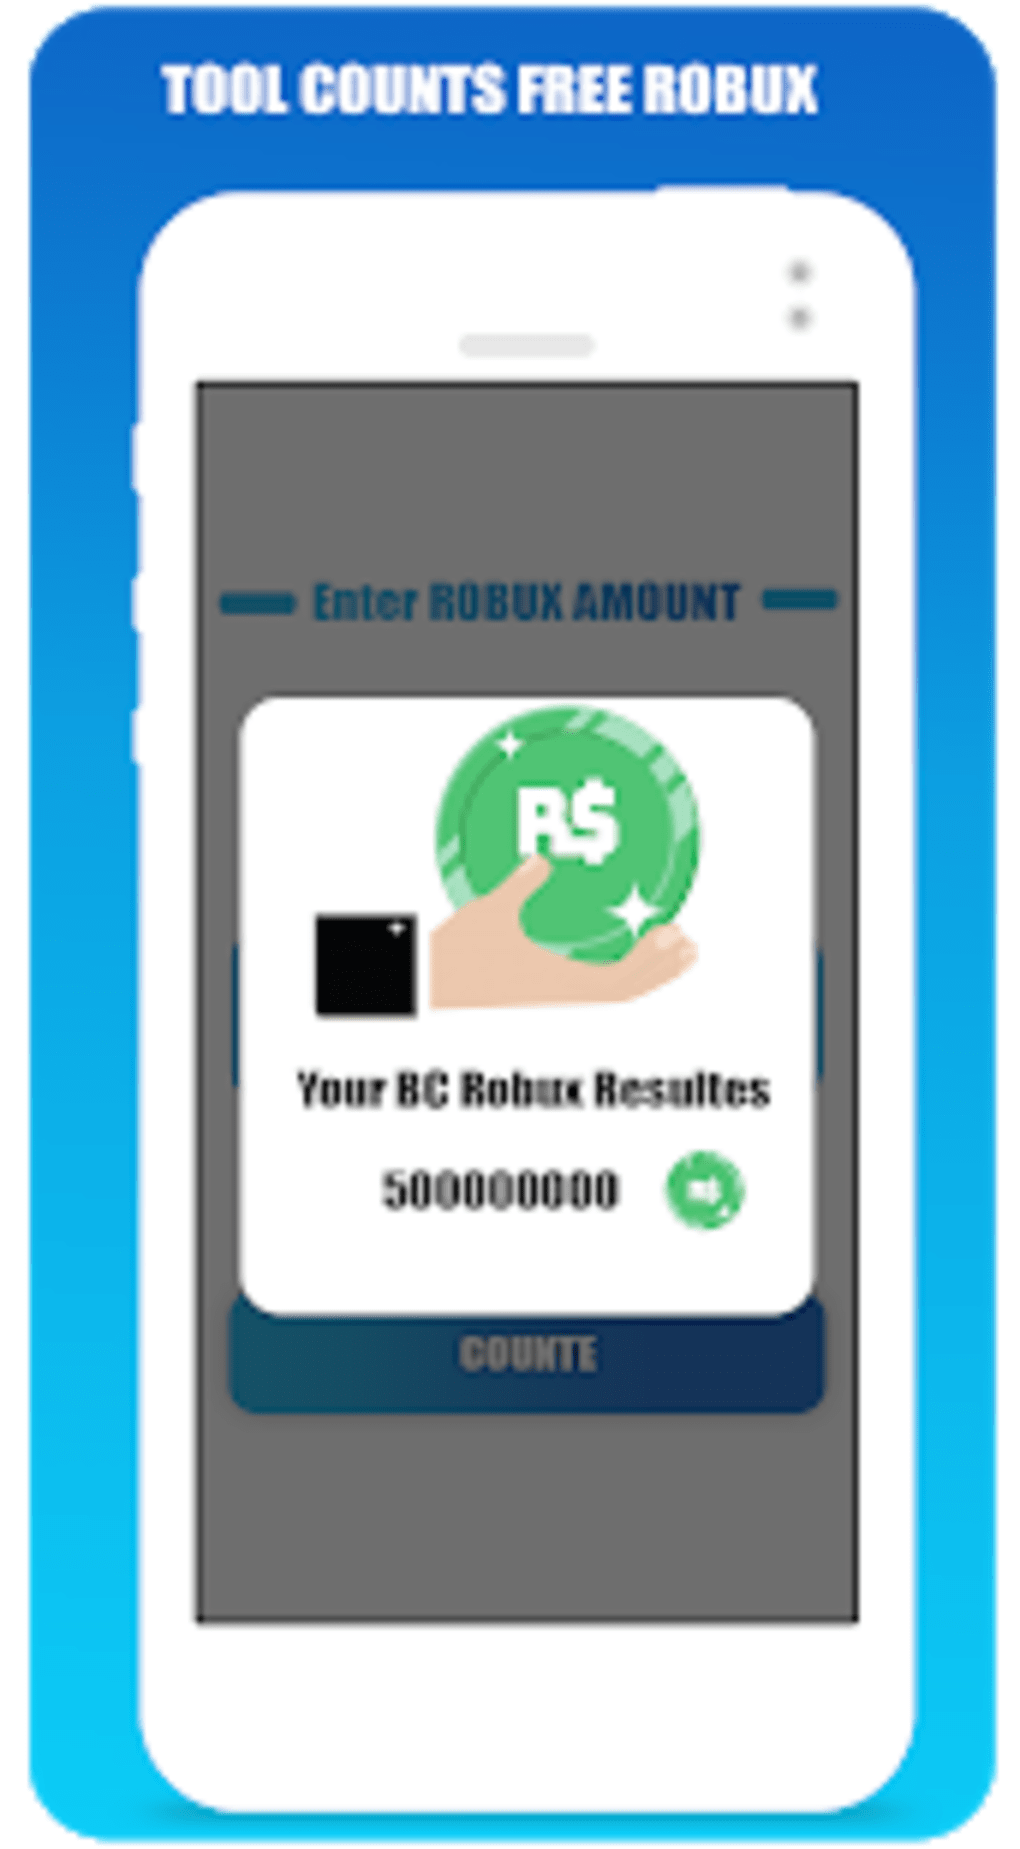 Free robux for roblox guide (robux.project.a1.freerobuxforrobloxguide) 2.0  APK Download - Android APK - APKsHub